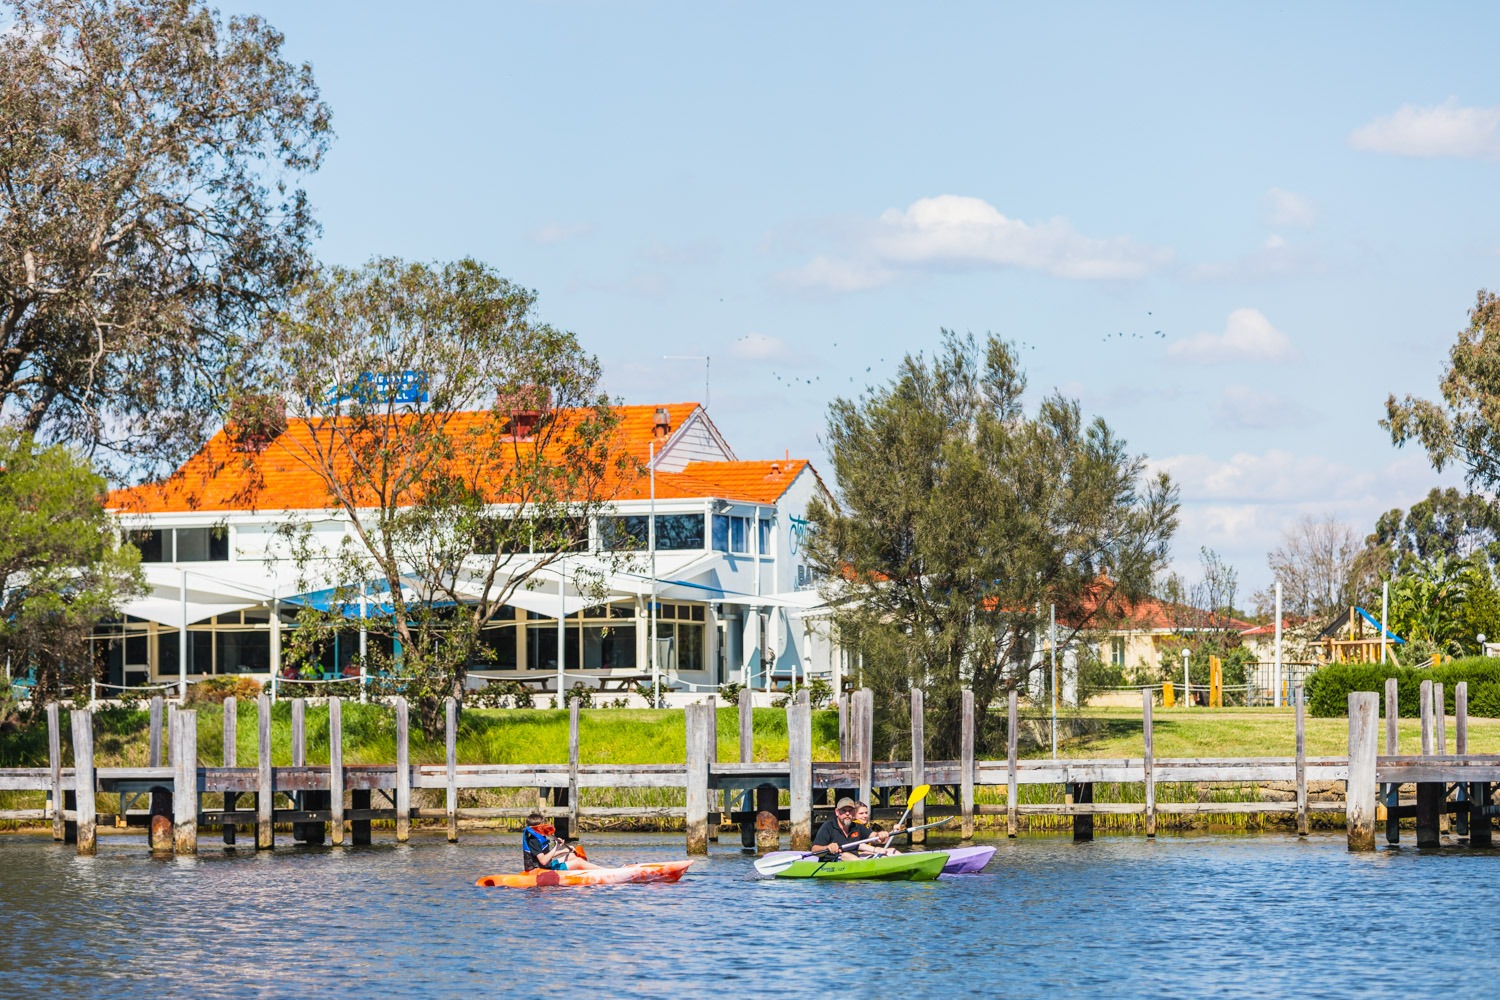 Jetty's Bar and Grill on the Murray River near Pinjarra